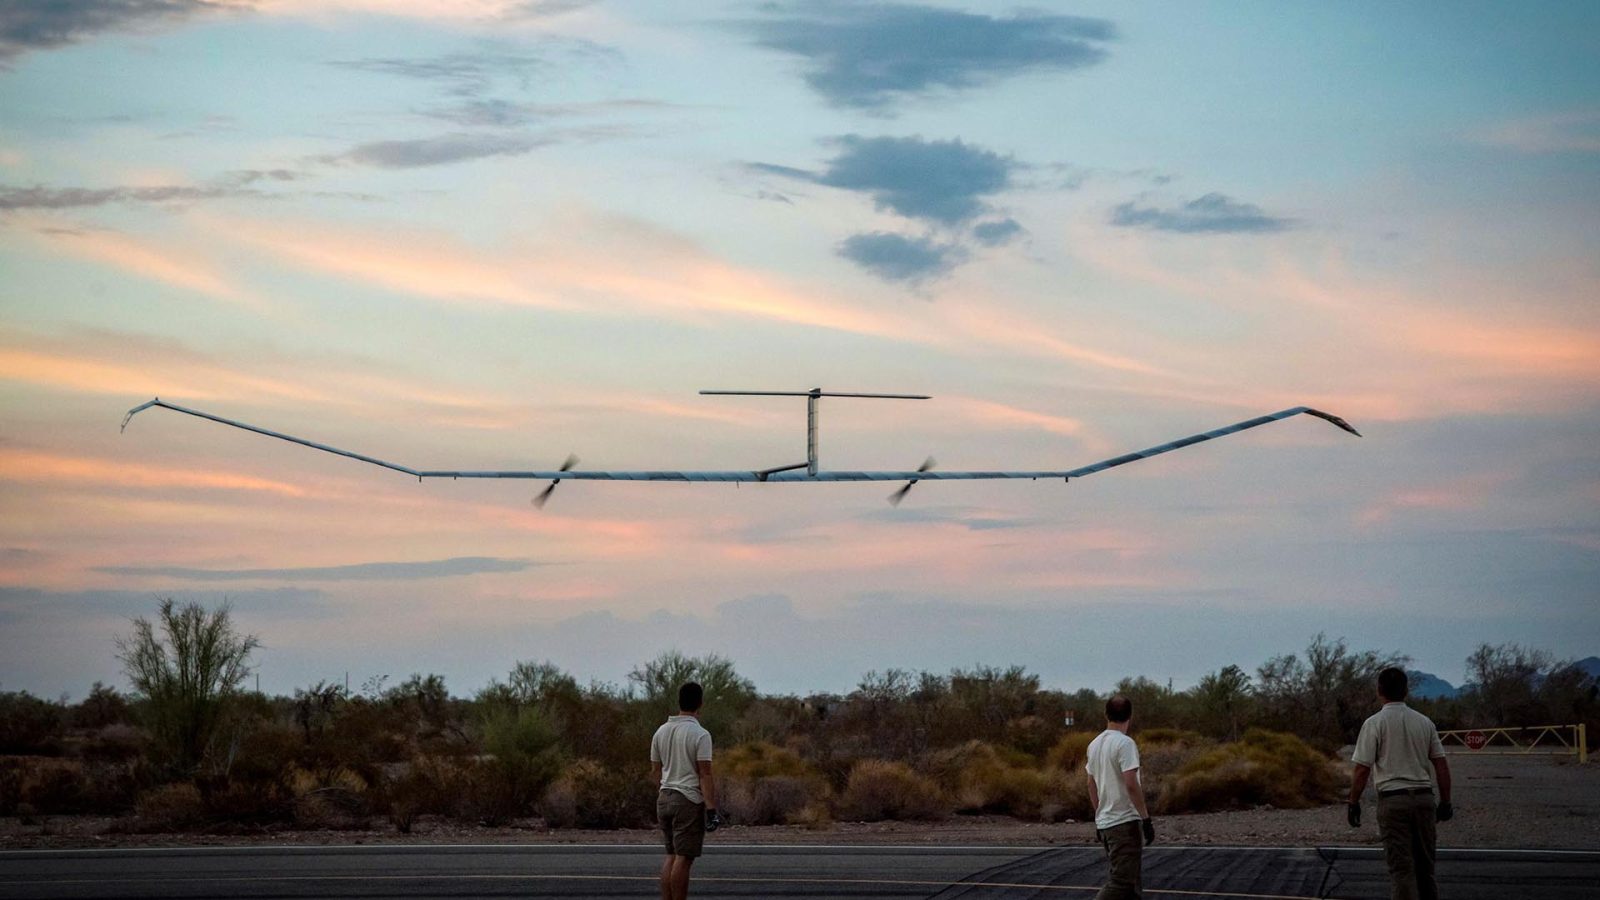 Airbus' Zephyr high altitude drone sets a new world record with 26 days of continuous flight